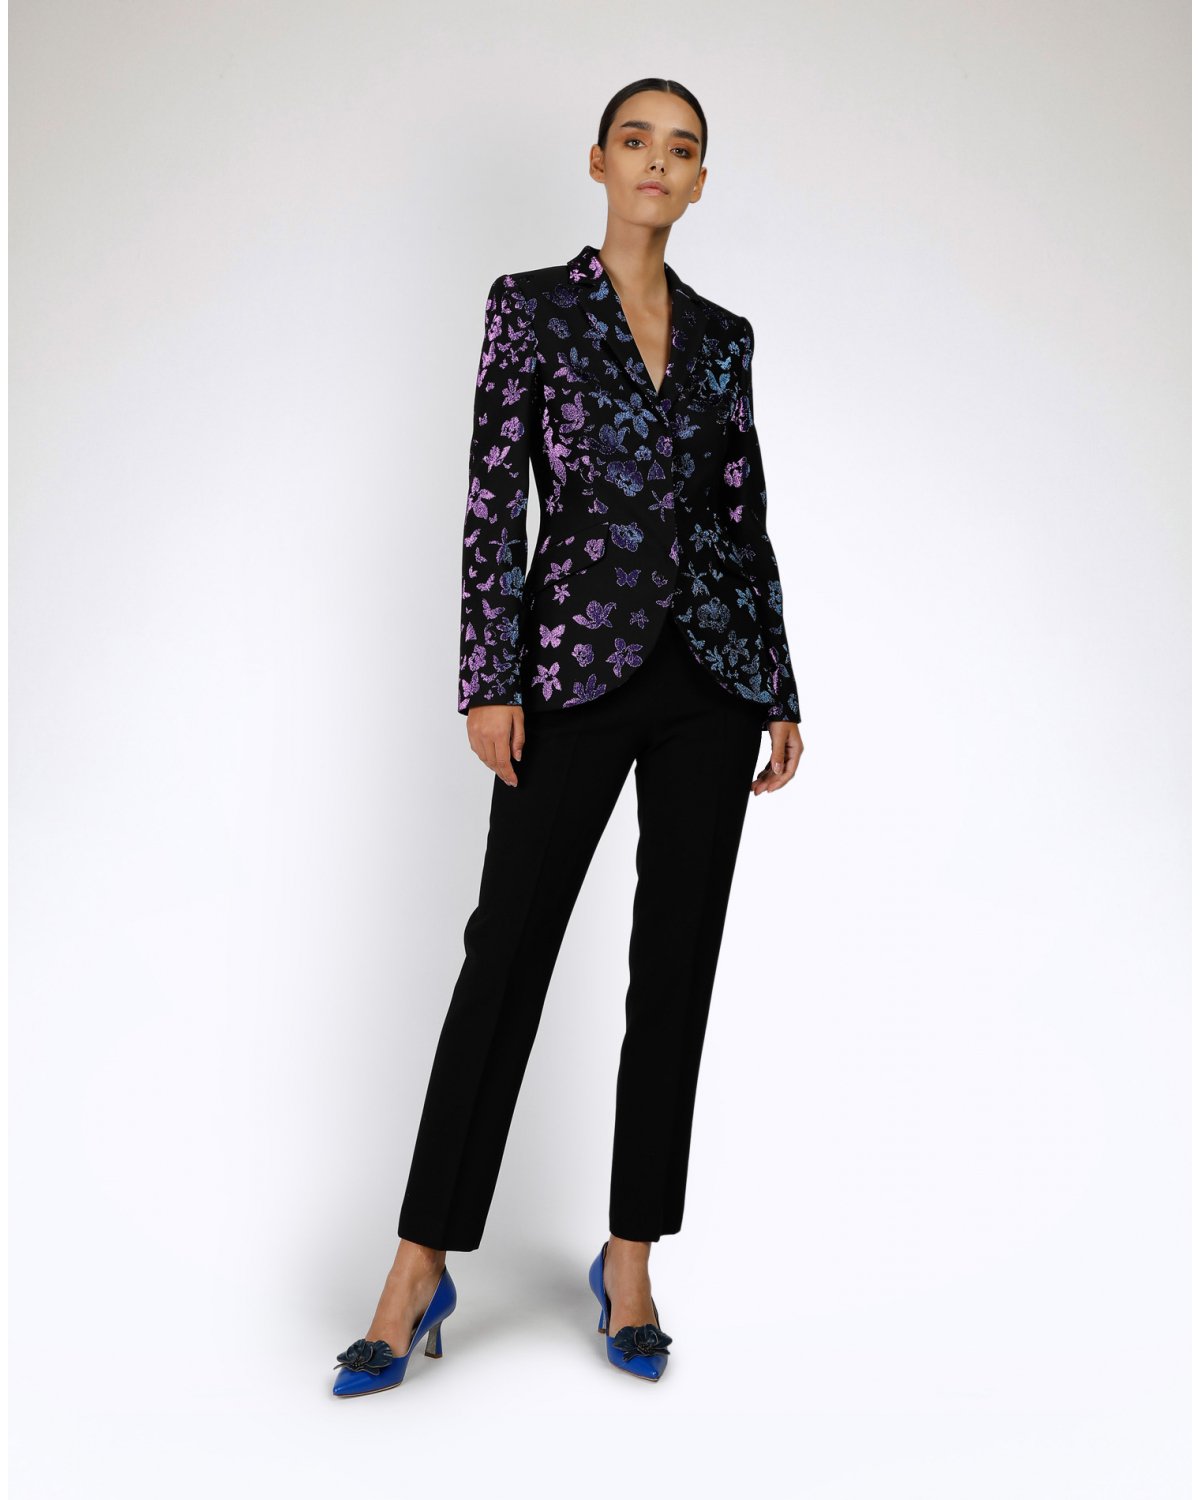 Lamè jacquard blazer | This week new arrivals, Party Collection | Genny